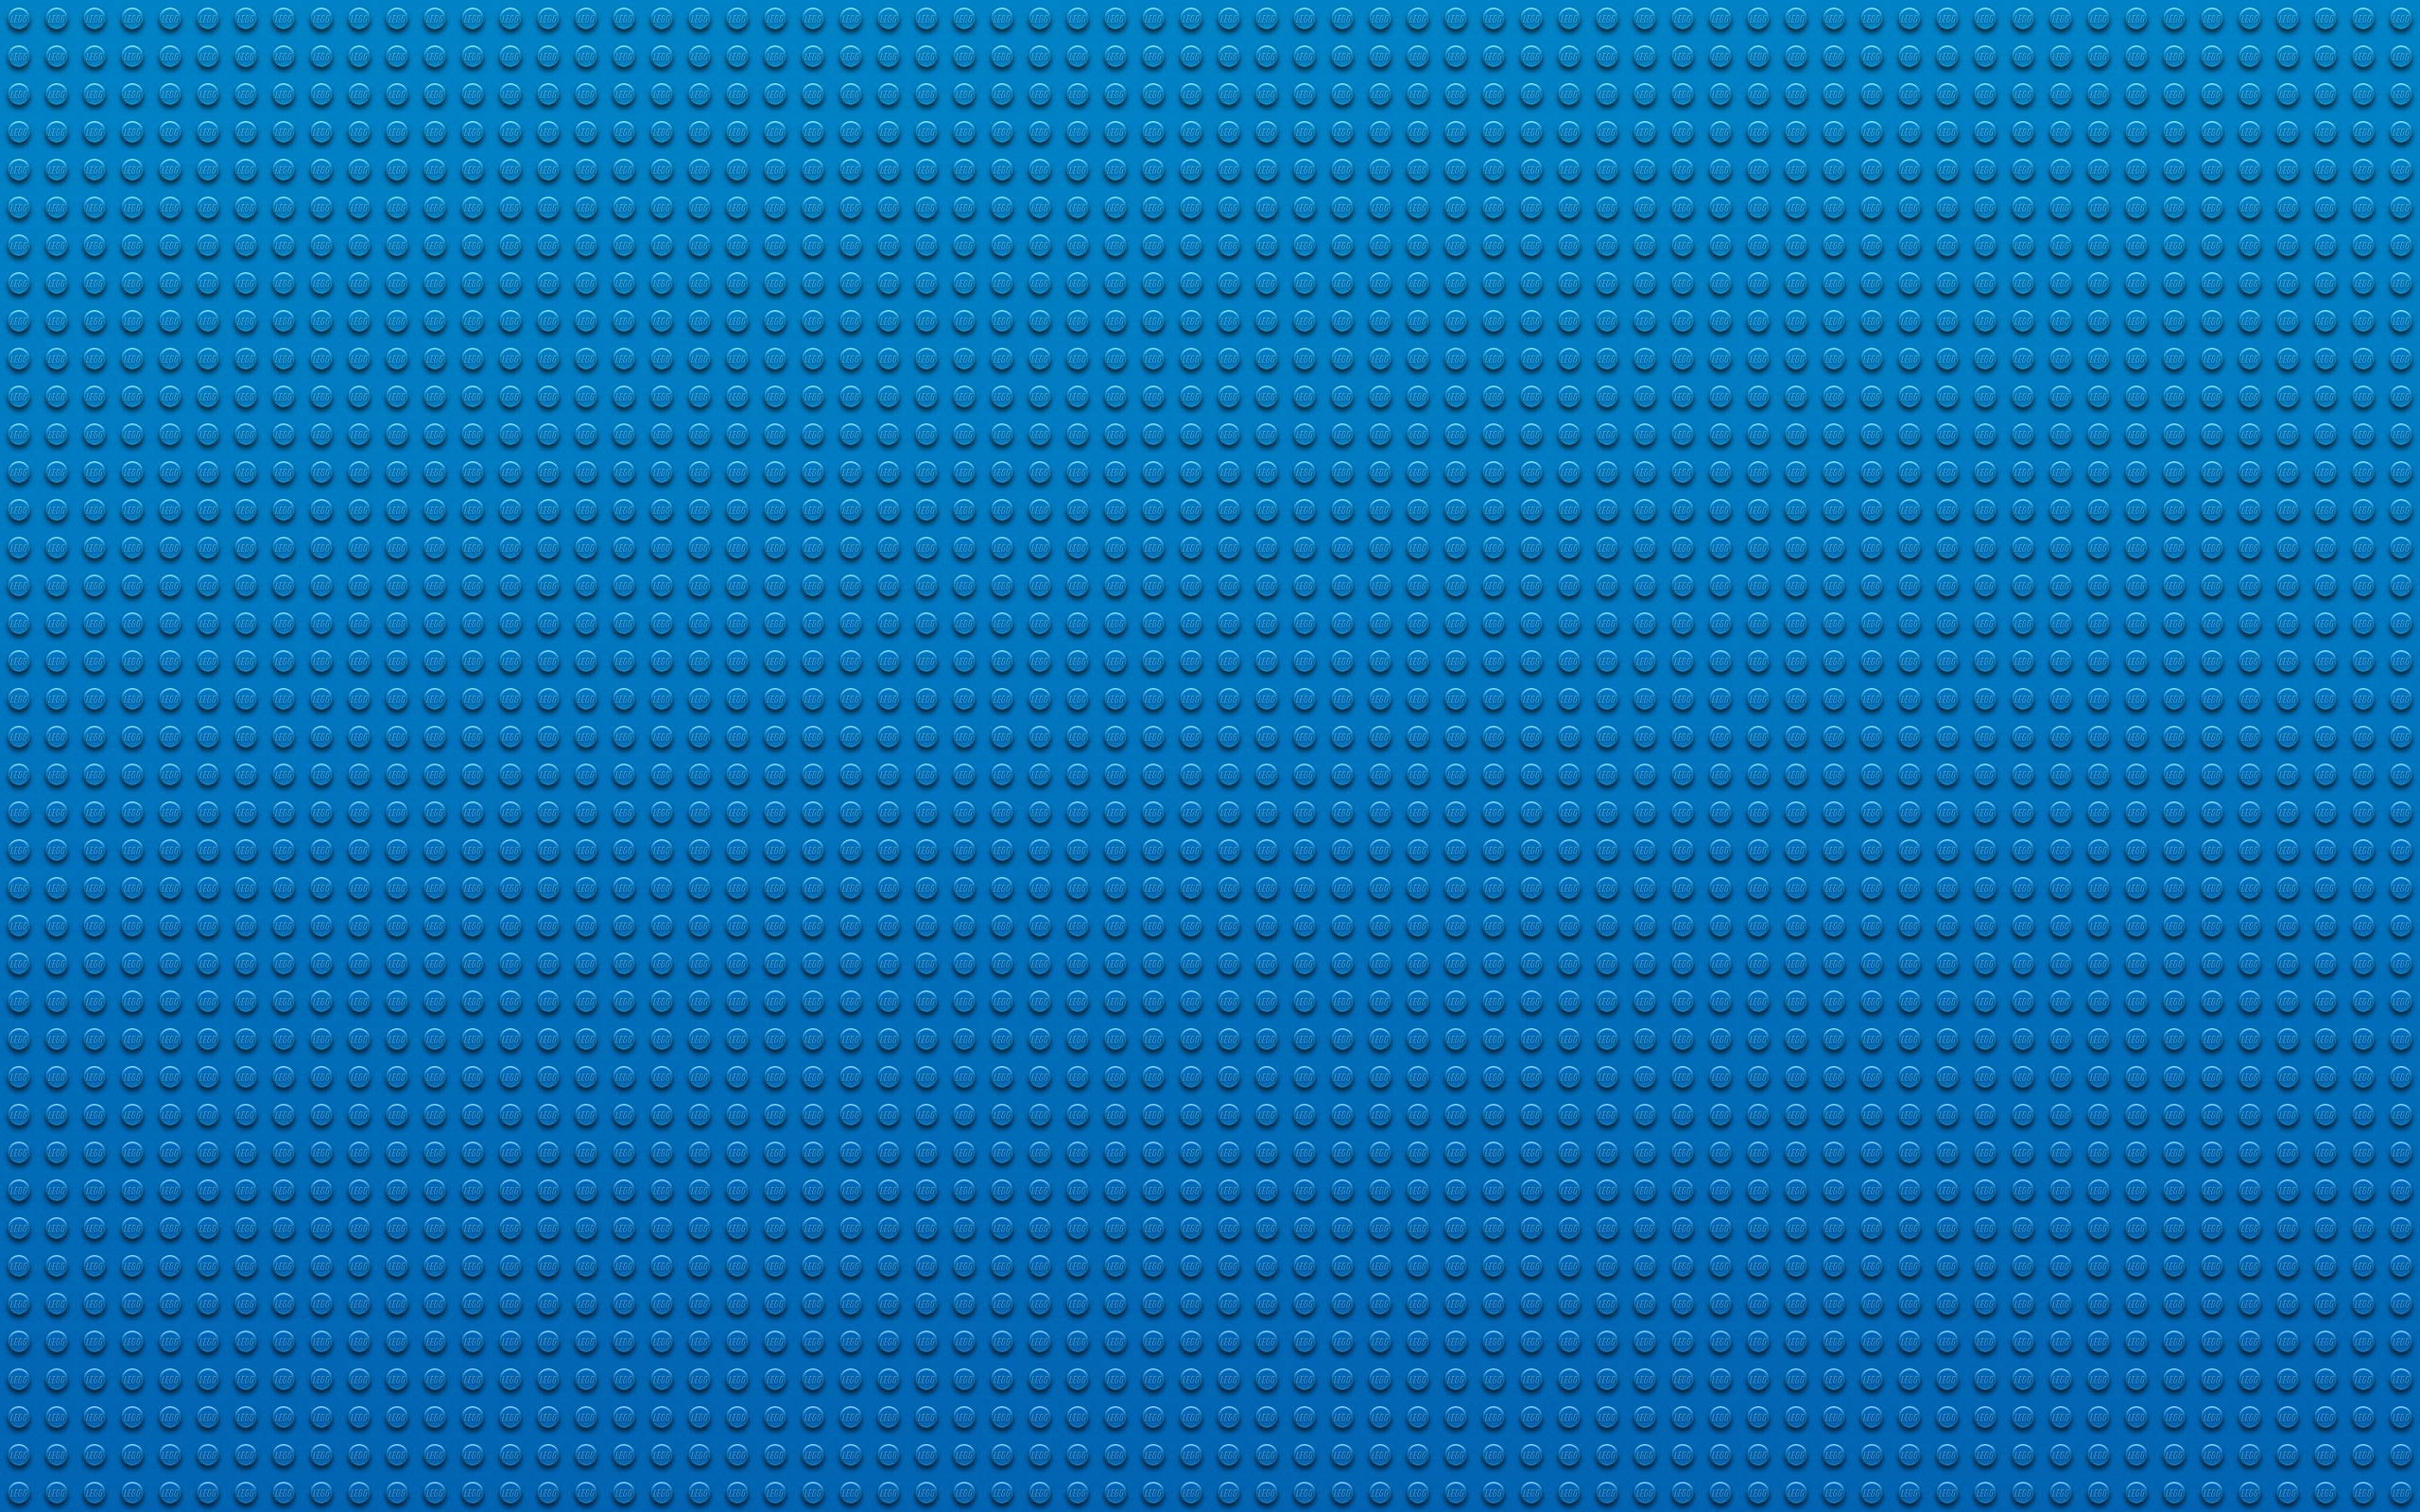 Lego Texture for 2560 x 1600 widescreen resolution